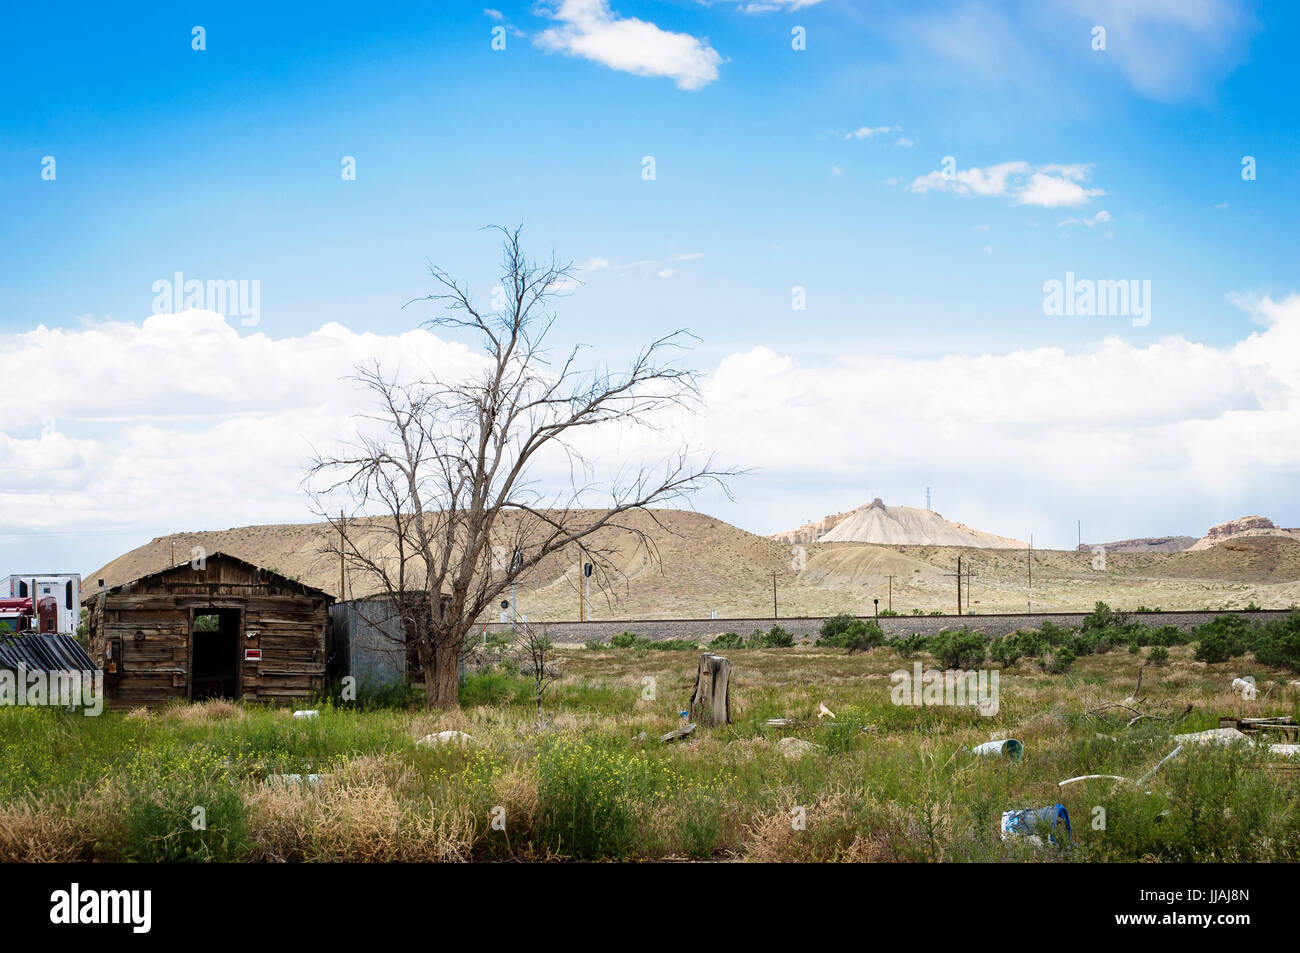 Abandoned, rundown building on side of road Stock Photo